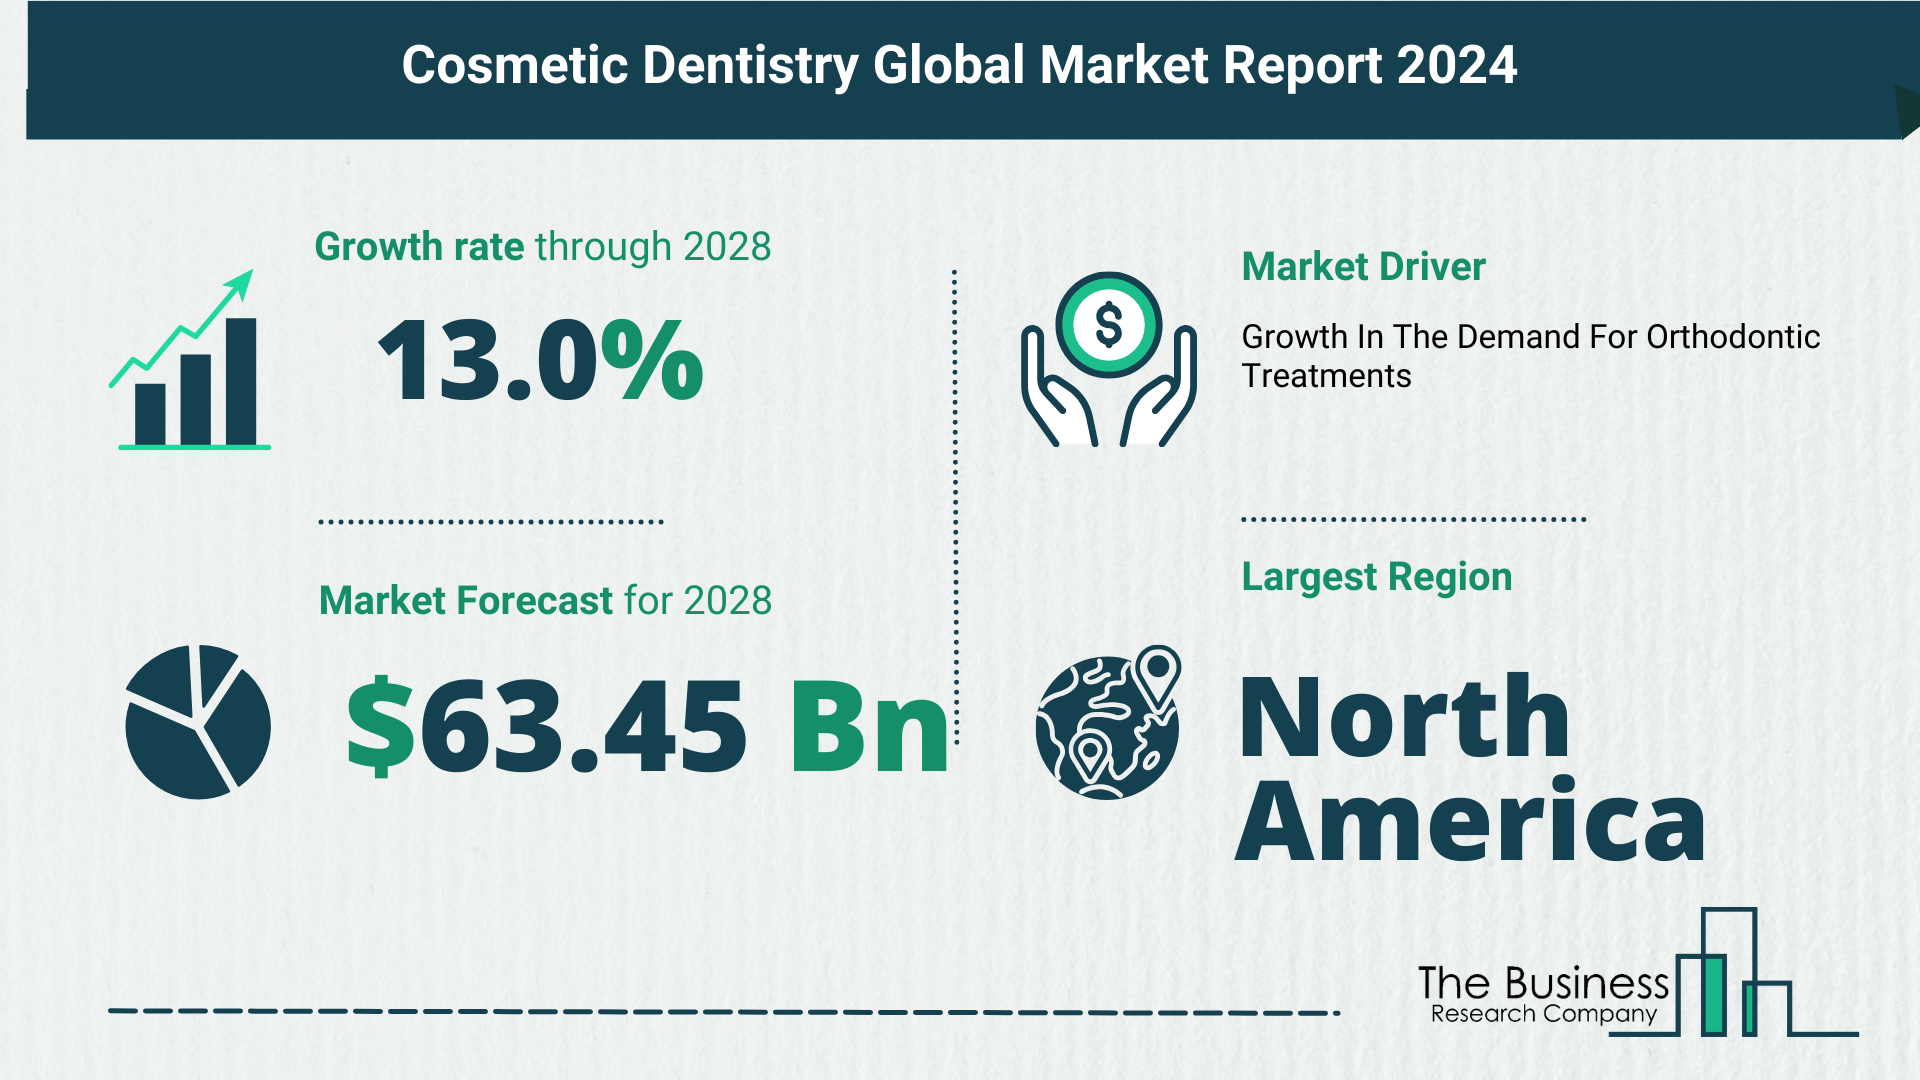 What Is The Forecast Growth Rate For The Cosmetic Dentistry Market?